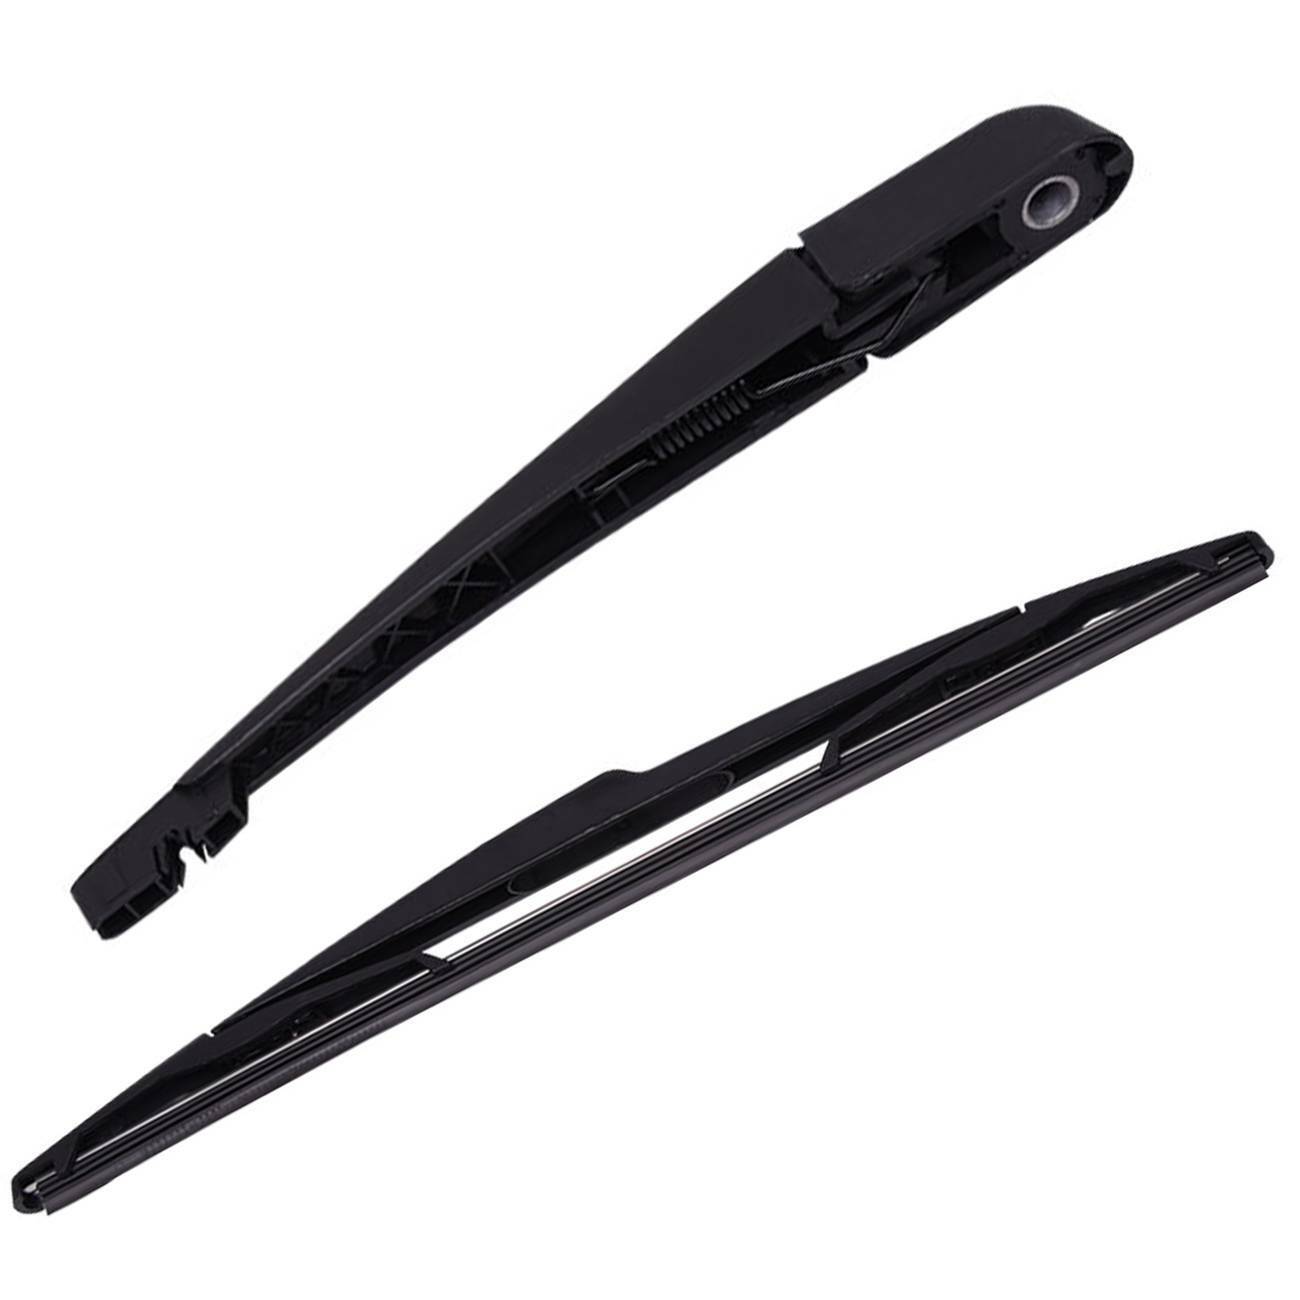 FOR Dodge Chrysler Grand Caravan Town & Country Rear Windshield Wiper Arm&Blade